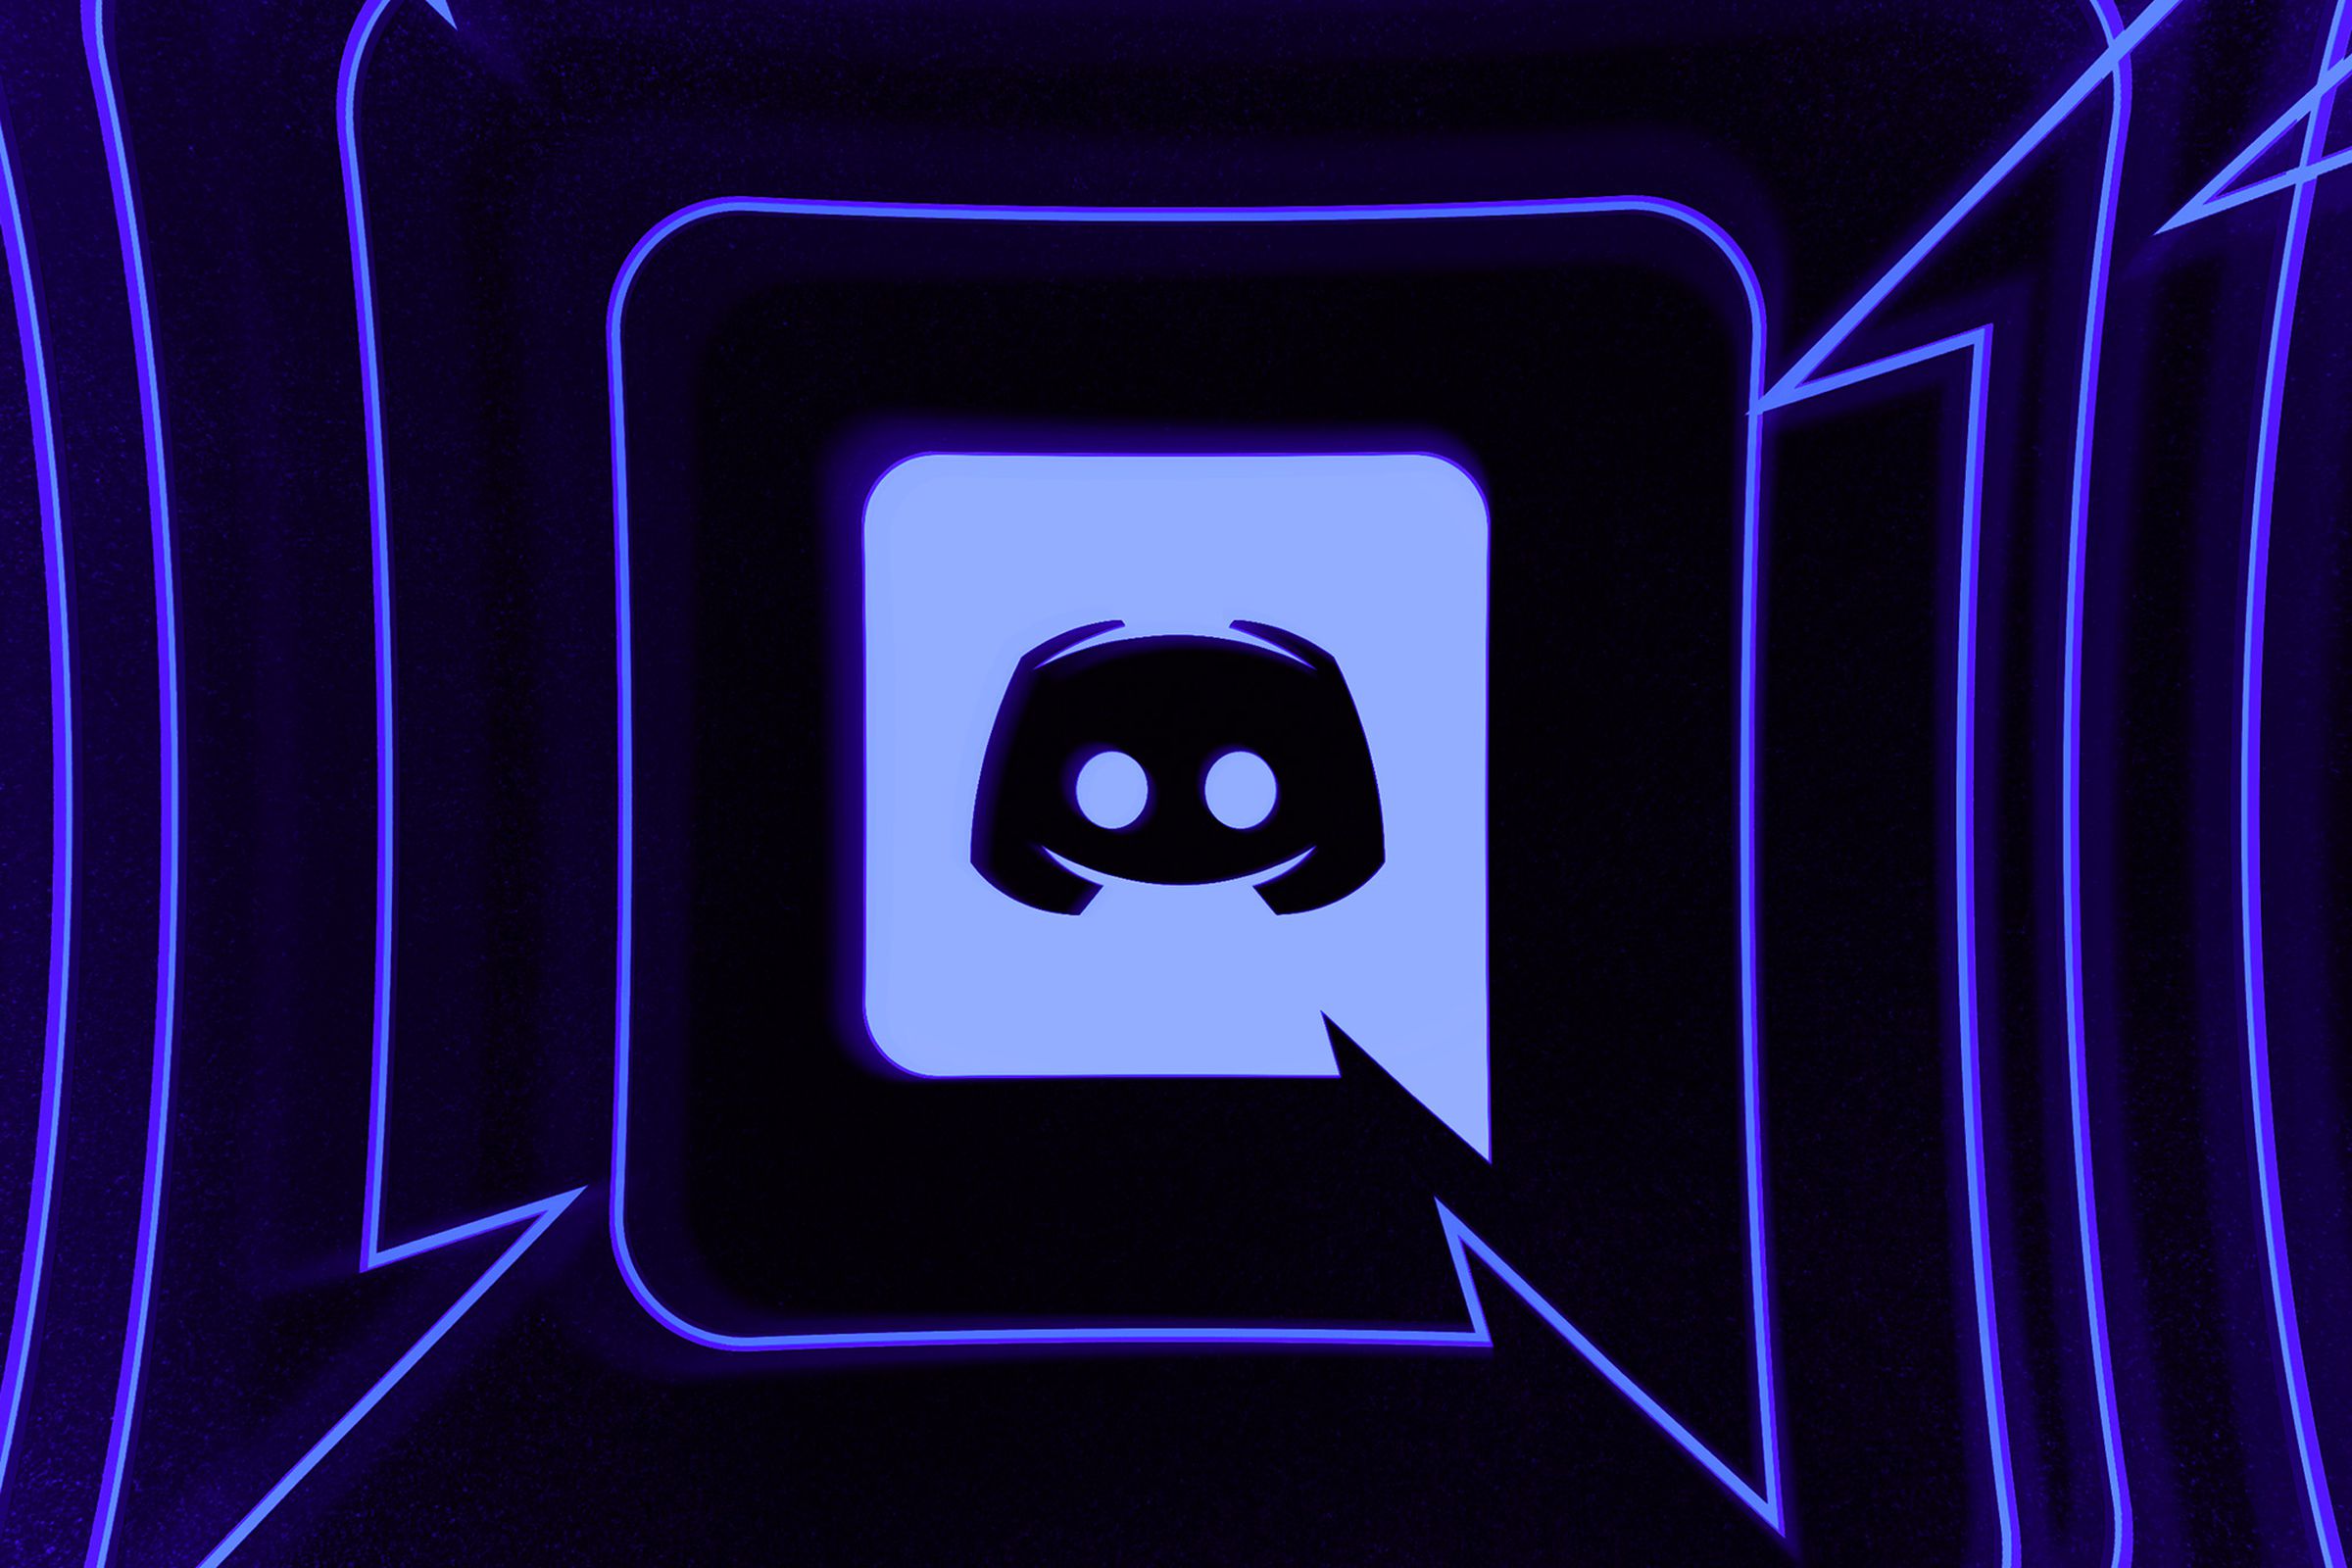 Discord is ending its Stage Discovery